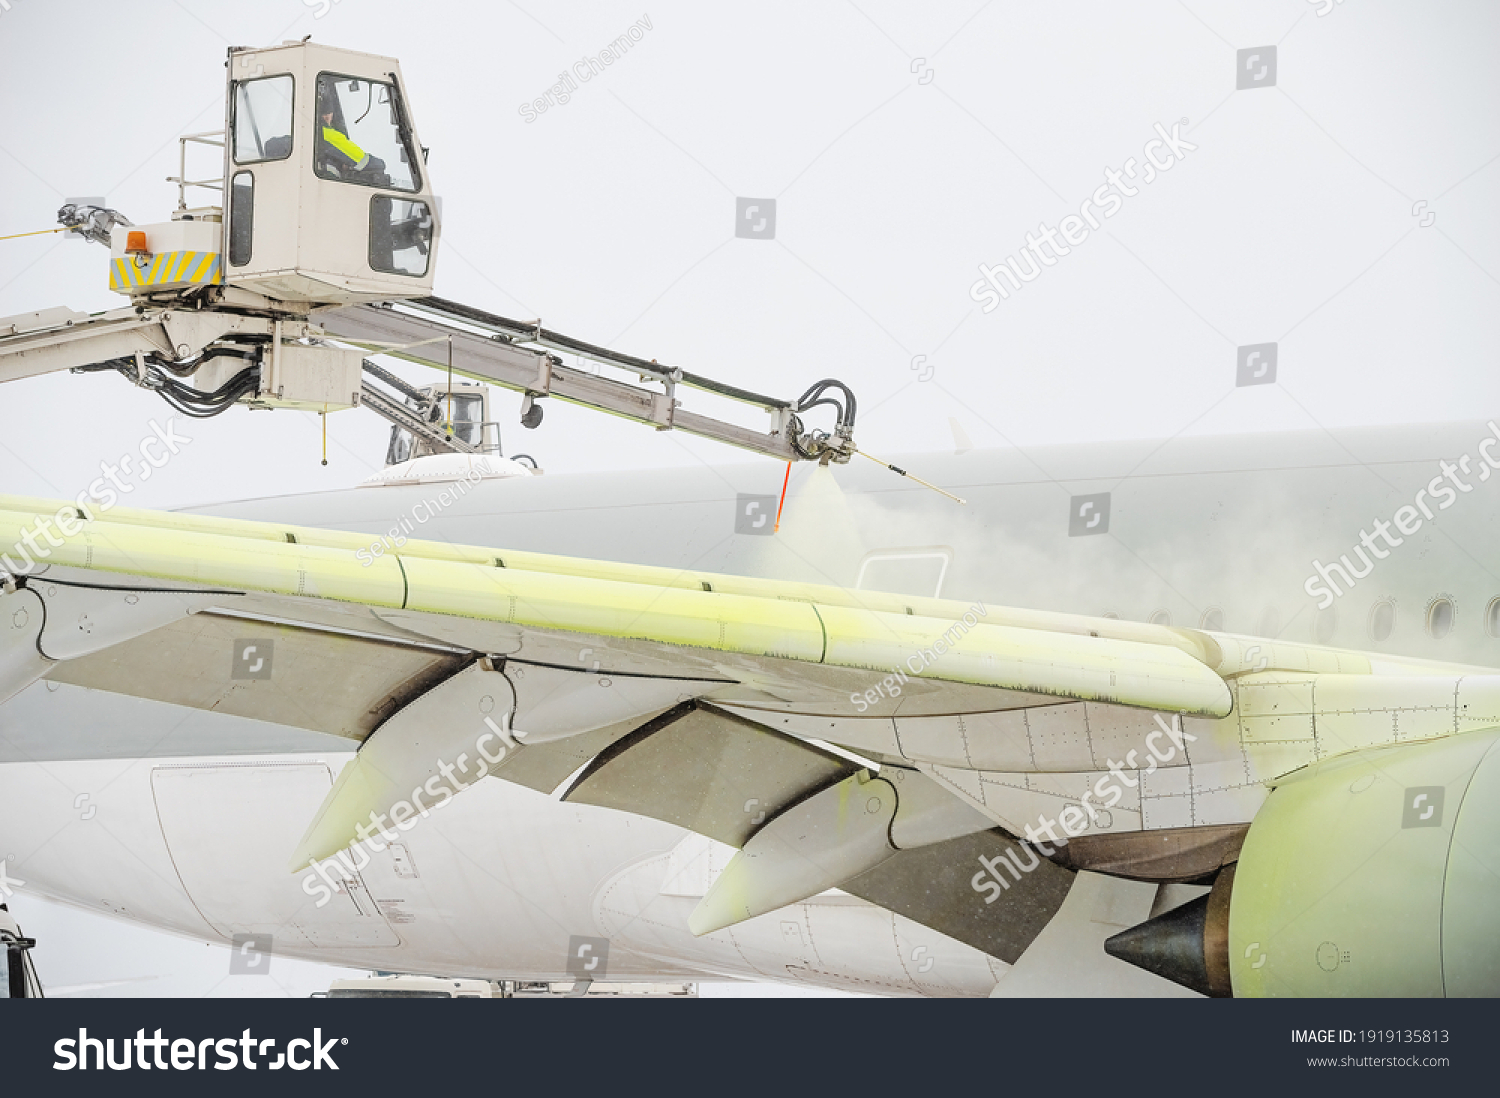 Winter at the airport. Snow storm. Airplane de-icing before take off. De-icing the aircraft before the flight. The de-icing machine sprinkles the wing of a passenger plane with de-icing fluid. #1919135813